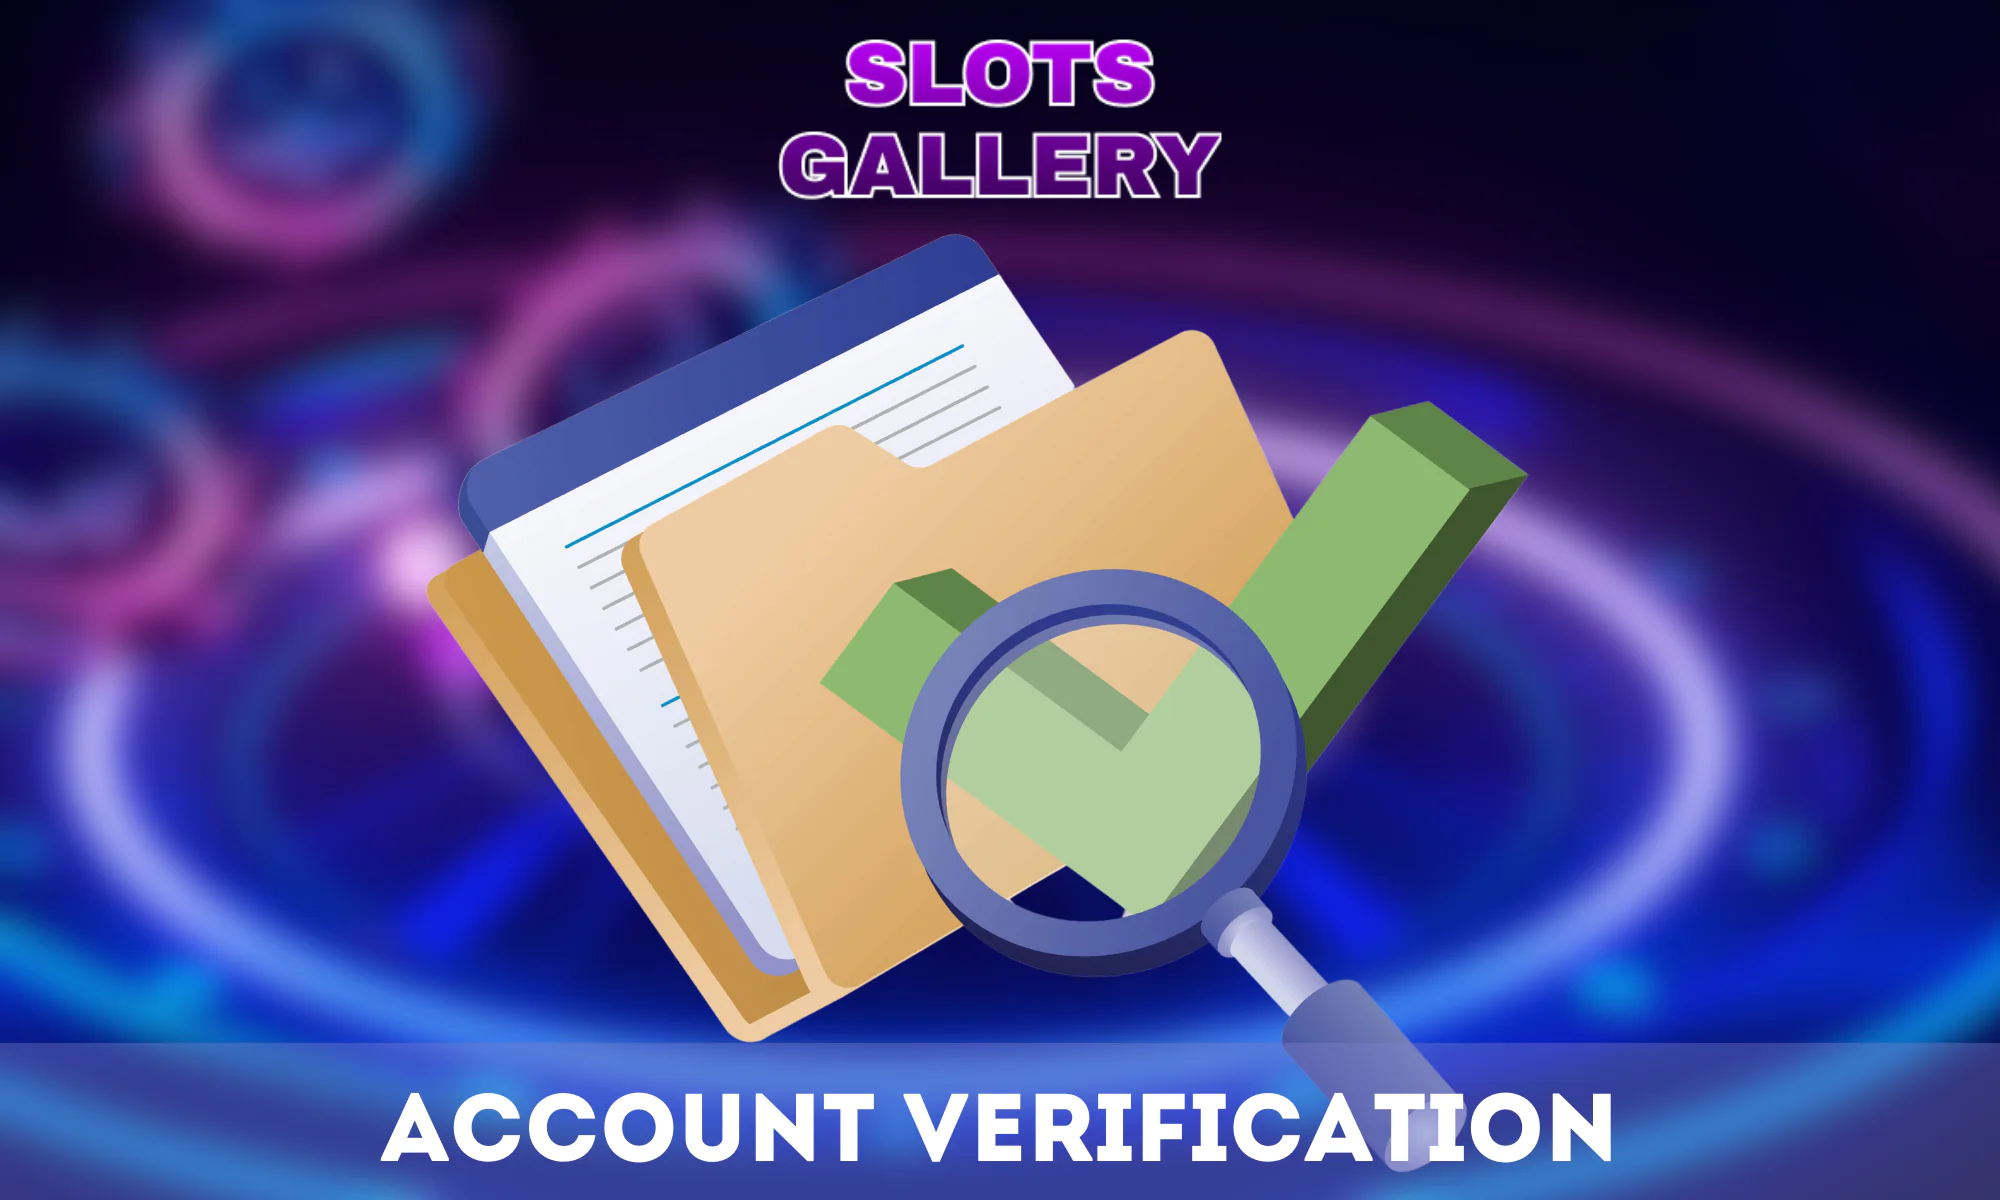 A few steps to quickly pass Slots Gallery account verification